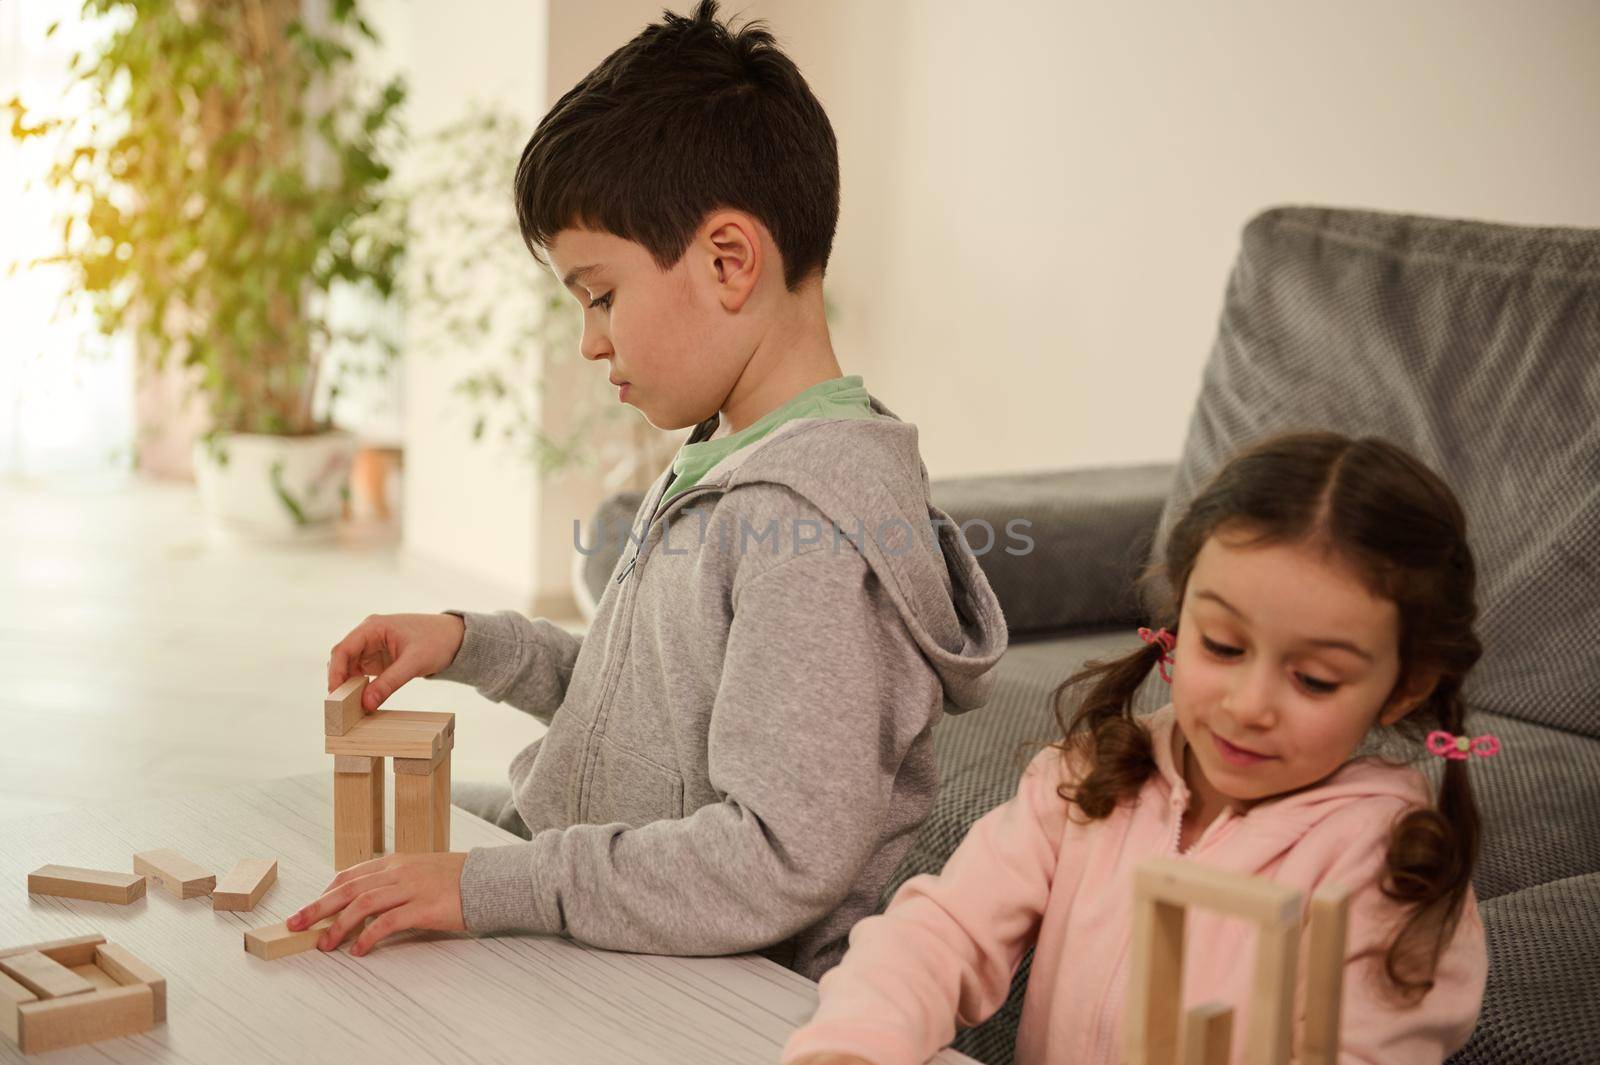 Focused children building structures with wooden blocks, playing board games in the home living room. Development of fine motors skills and concentration, educational leisure, family pastime concept.